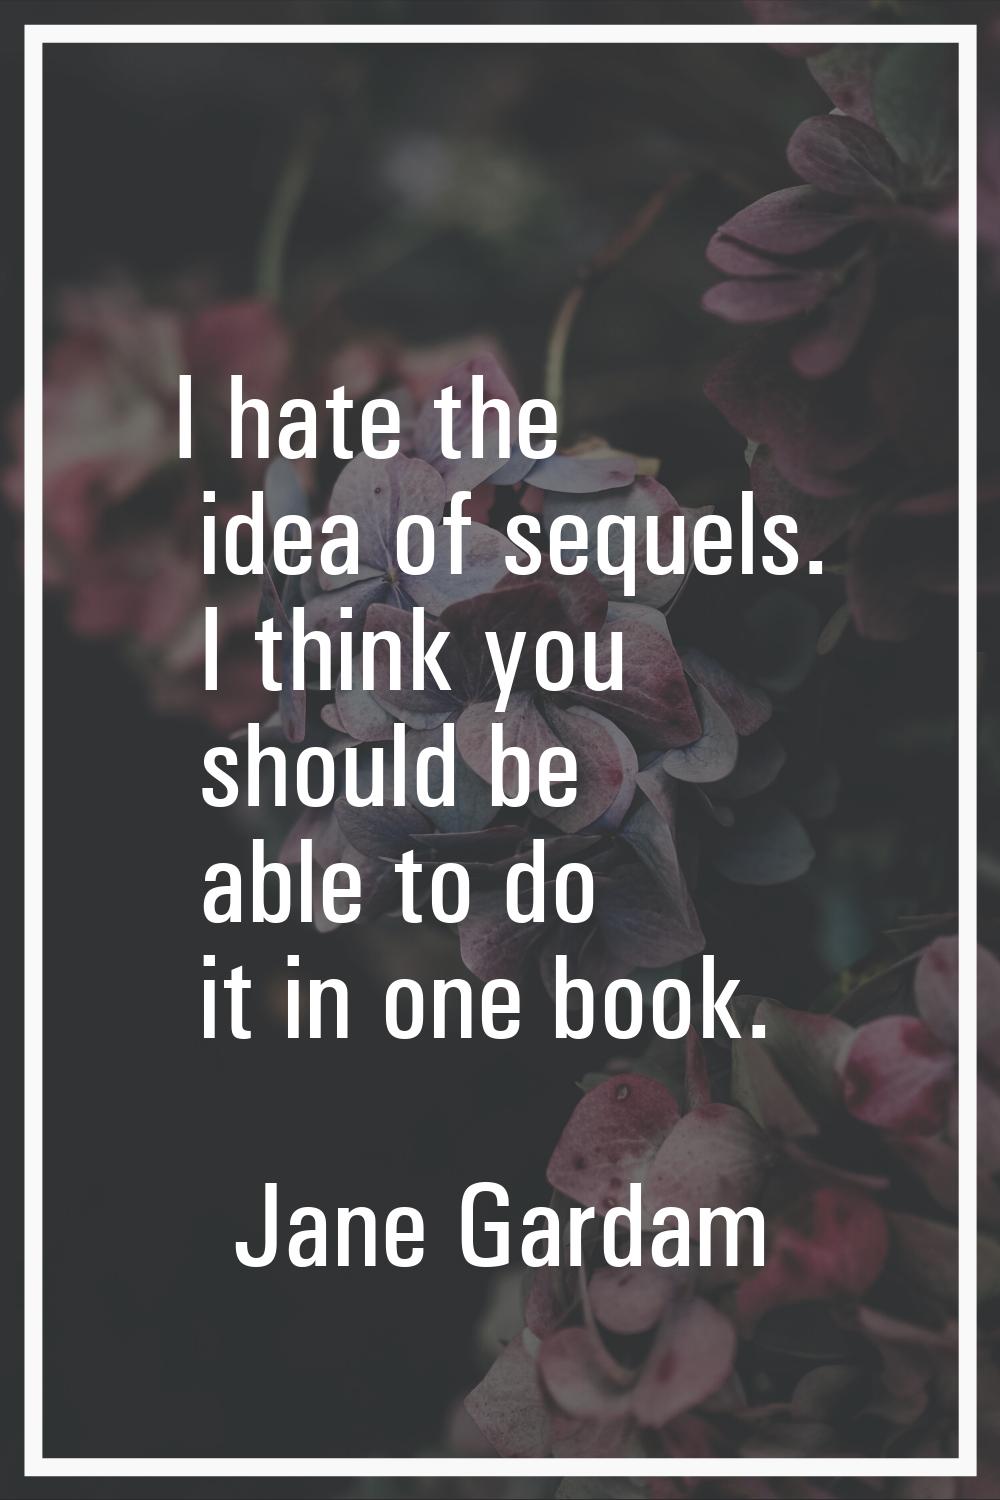 I hate the idea of sequels. I think you should be able to do it in one book.